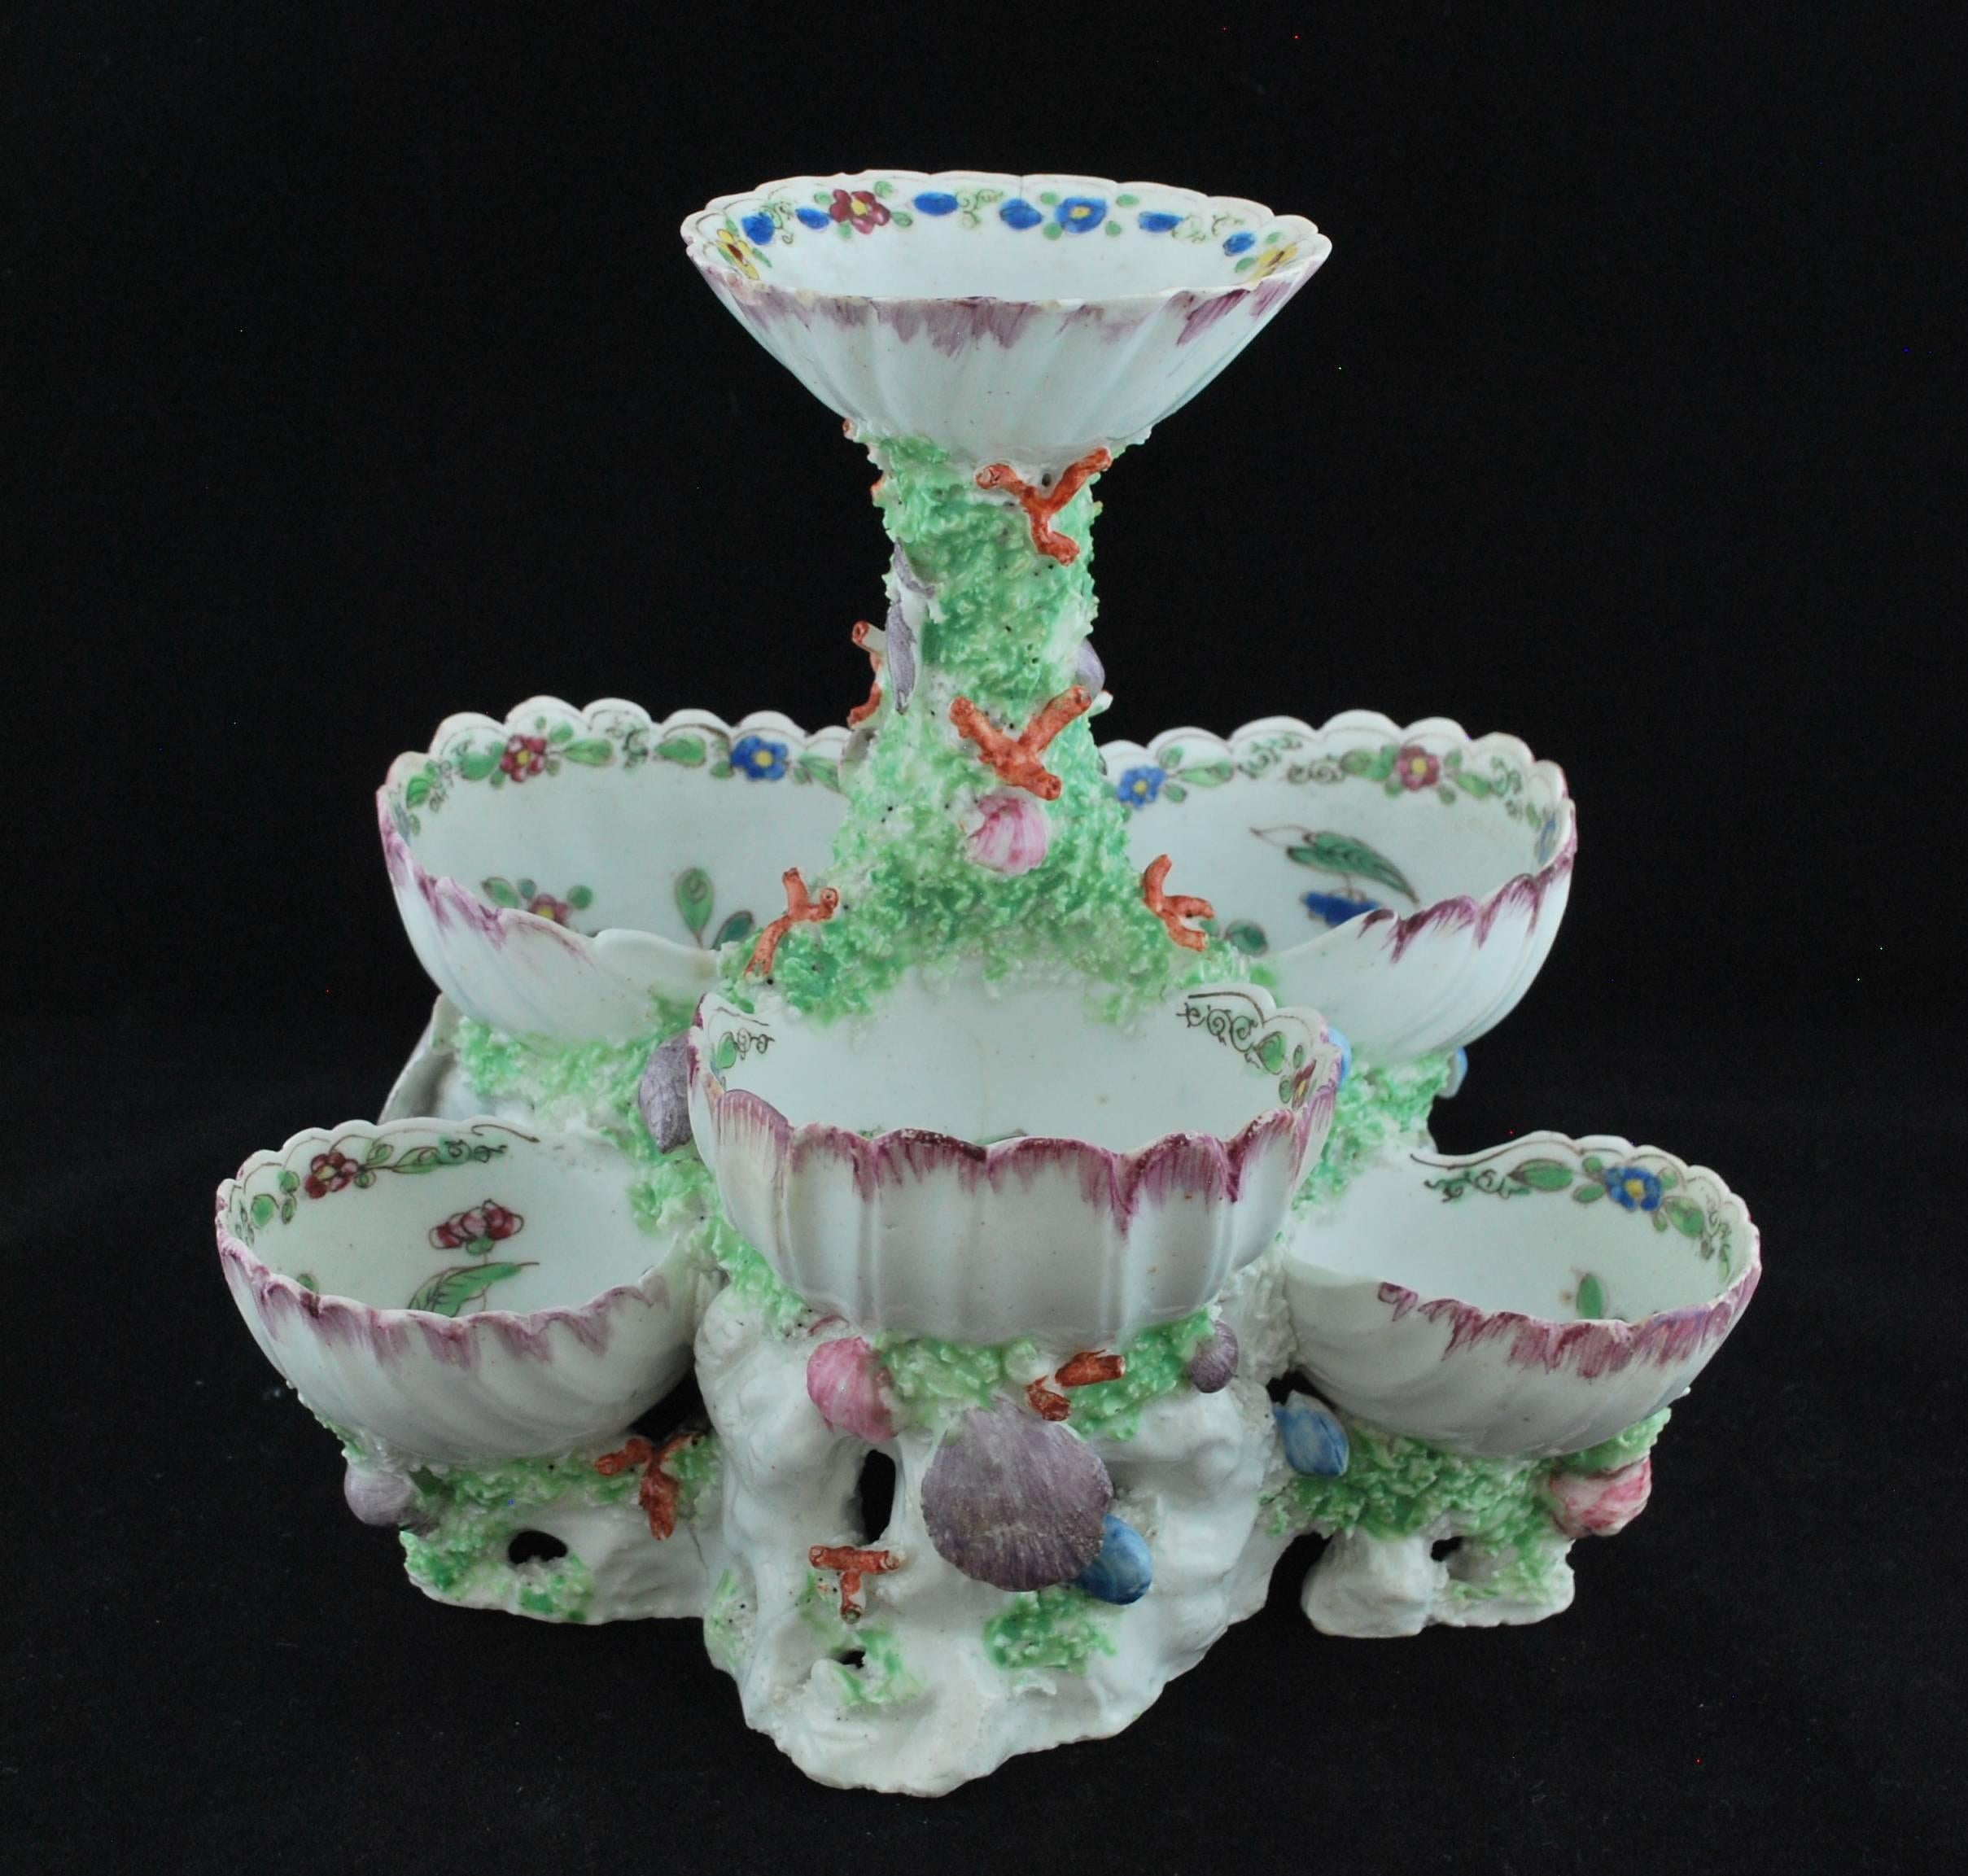 Three-tiered stand for sweetmeats, in the form of shells and coral, and enameled with flowers; it is rare to find these in such good condition. Probably from a large dessert service.

These stands were popular in the Georgian period and were made